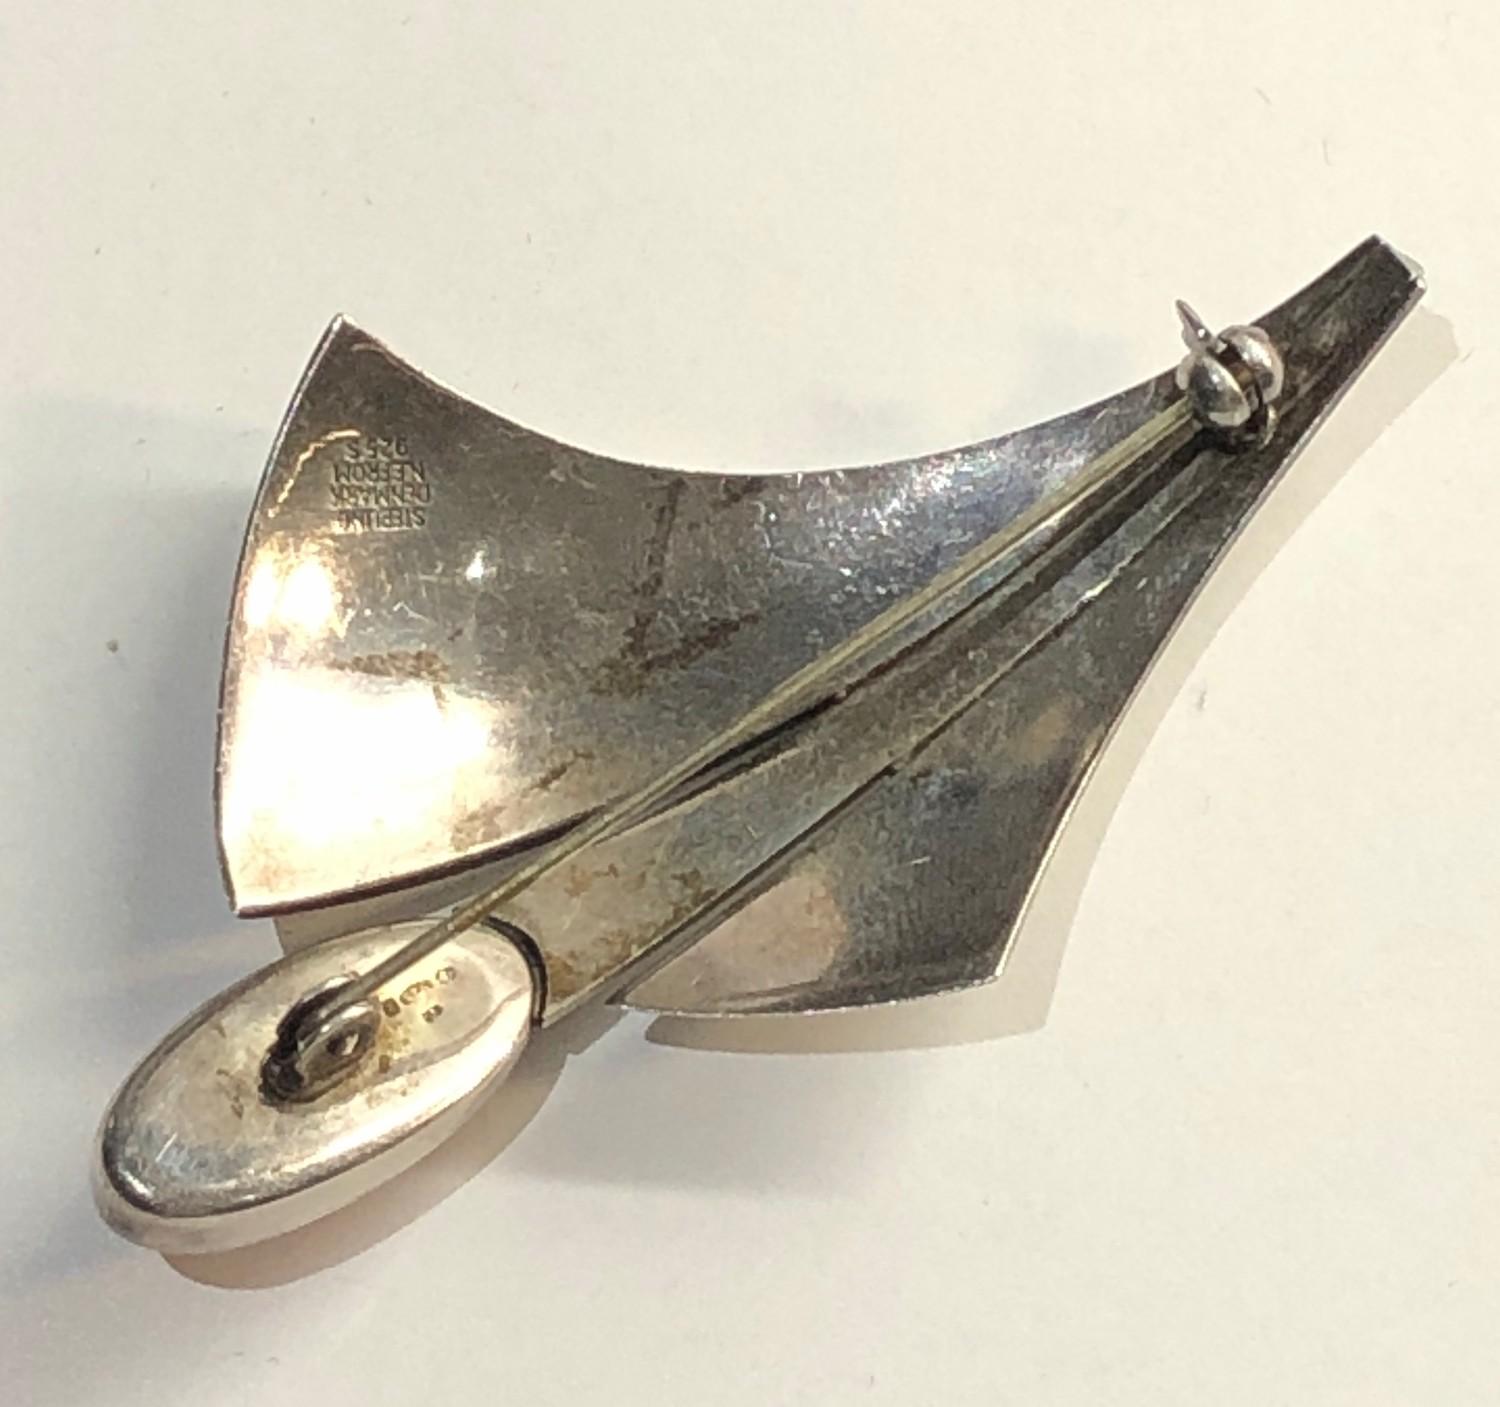 Modernist danish silver brooch by N.E.FROM measures approx 66mm by 40mm - Image 2 of 4